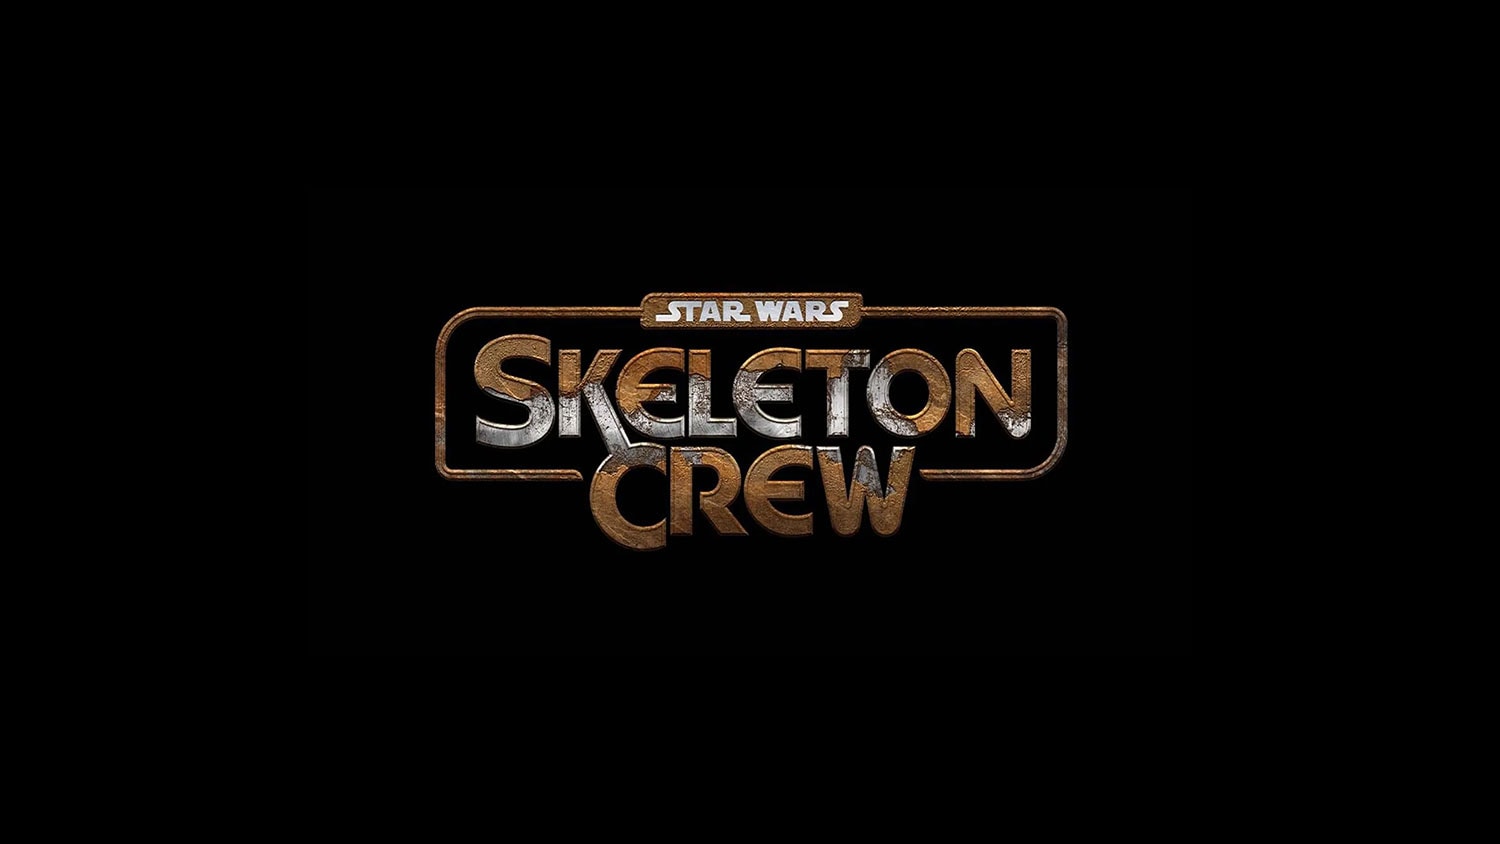 Star-Wars-Skeleton-Crew-Series-Has-An-Enormous-Budget